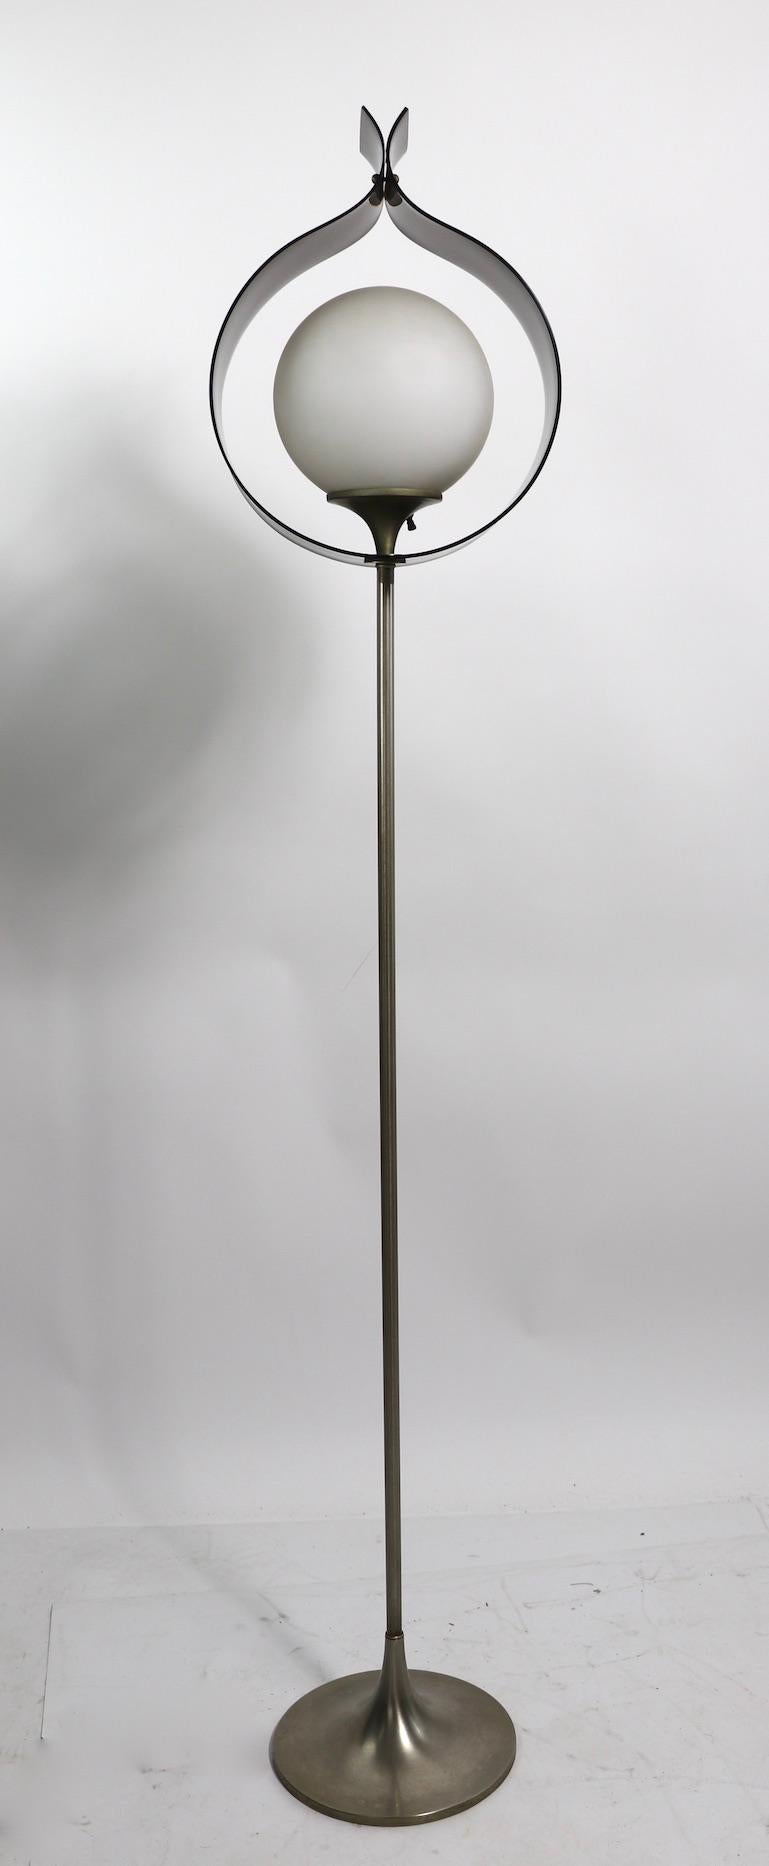 Rare mid century mod floor lamp having tinted acrylic tulip form shades which surround a frosted glass ball globe shade, on elegant elongated vertical base. This example is in very fine, original, clean and working condition. We have had many Laurel